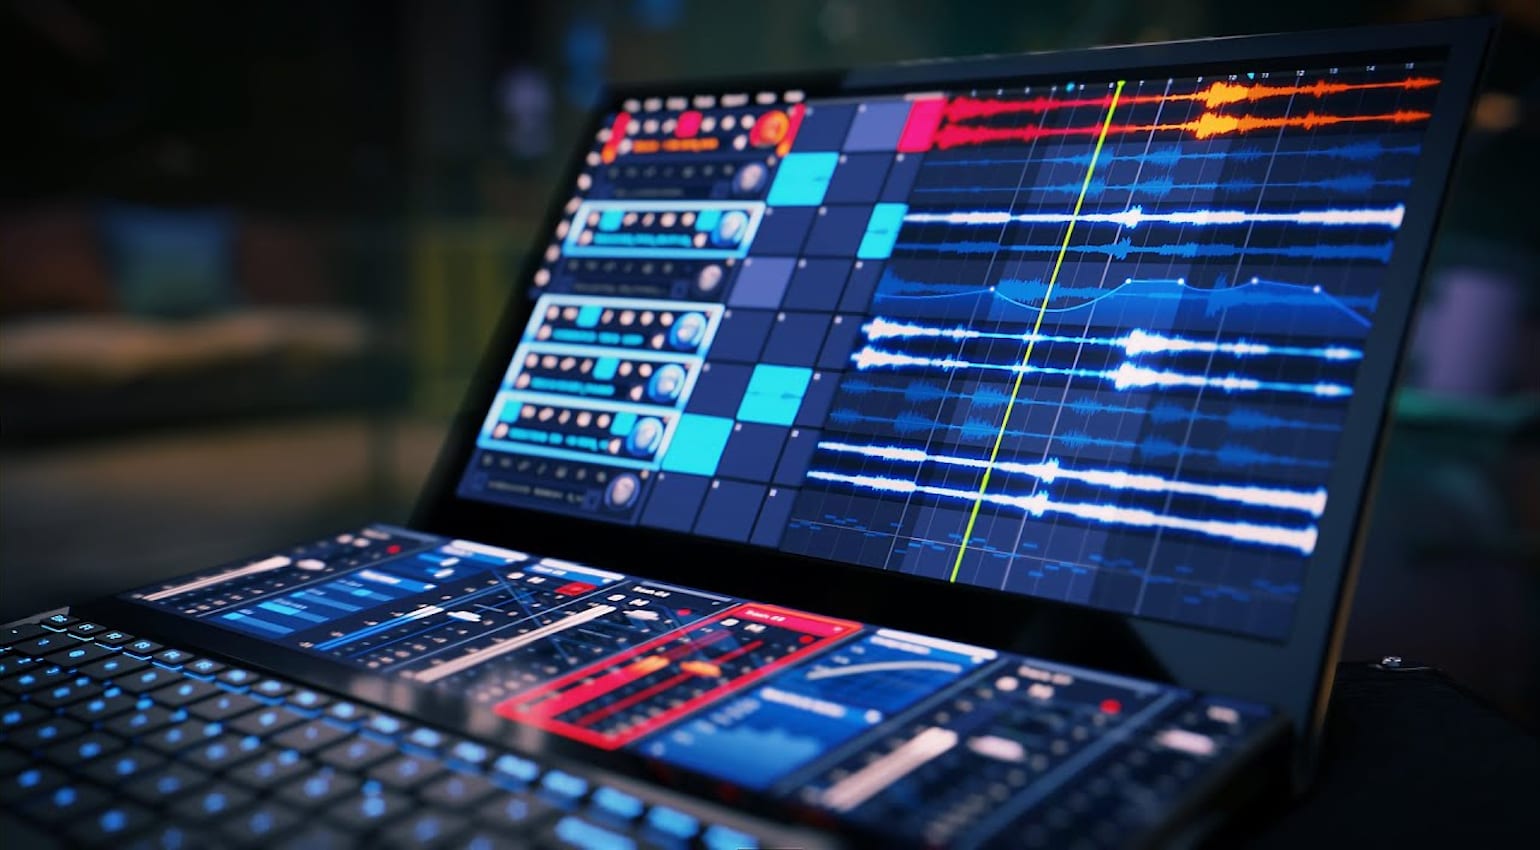 Best Windows laptops for music production 5 Topend machines for studio